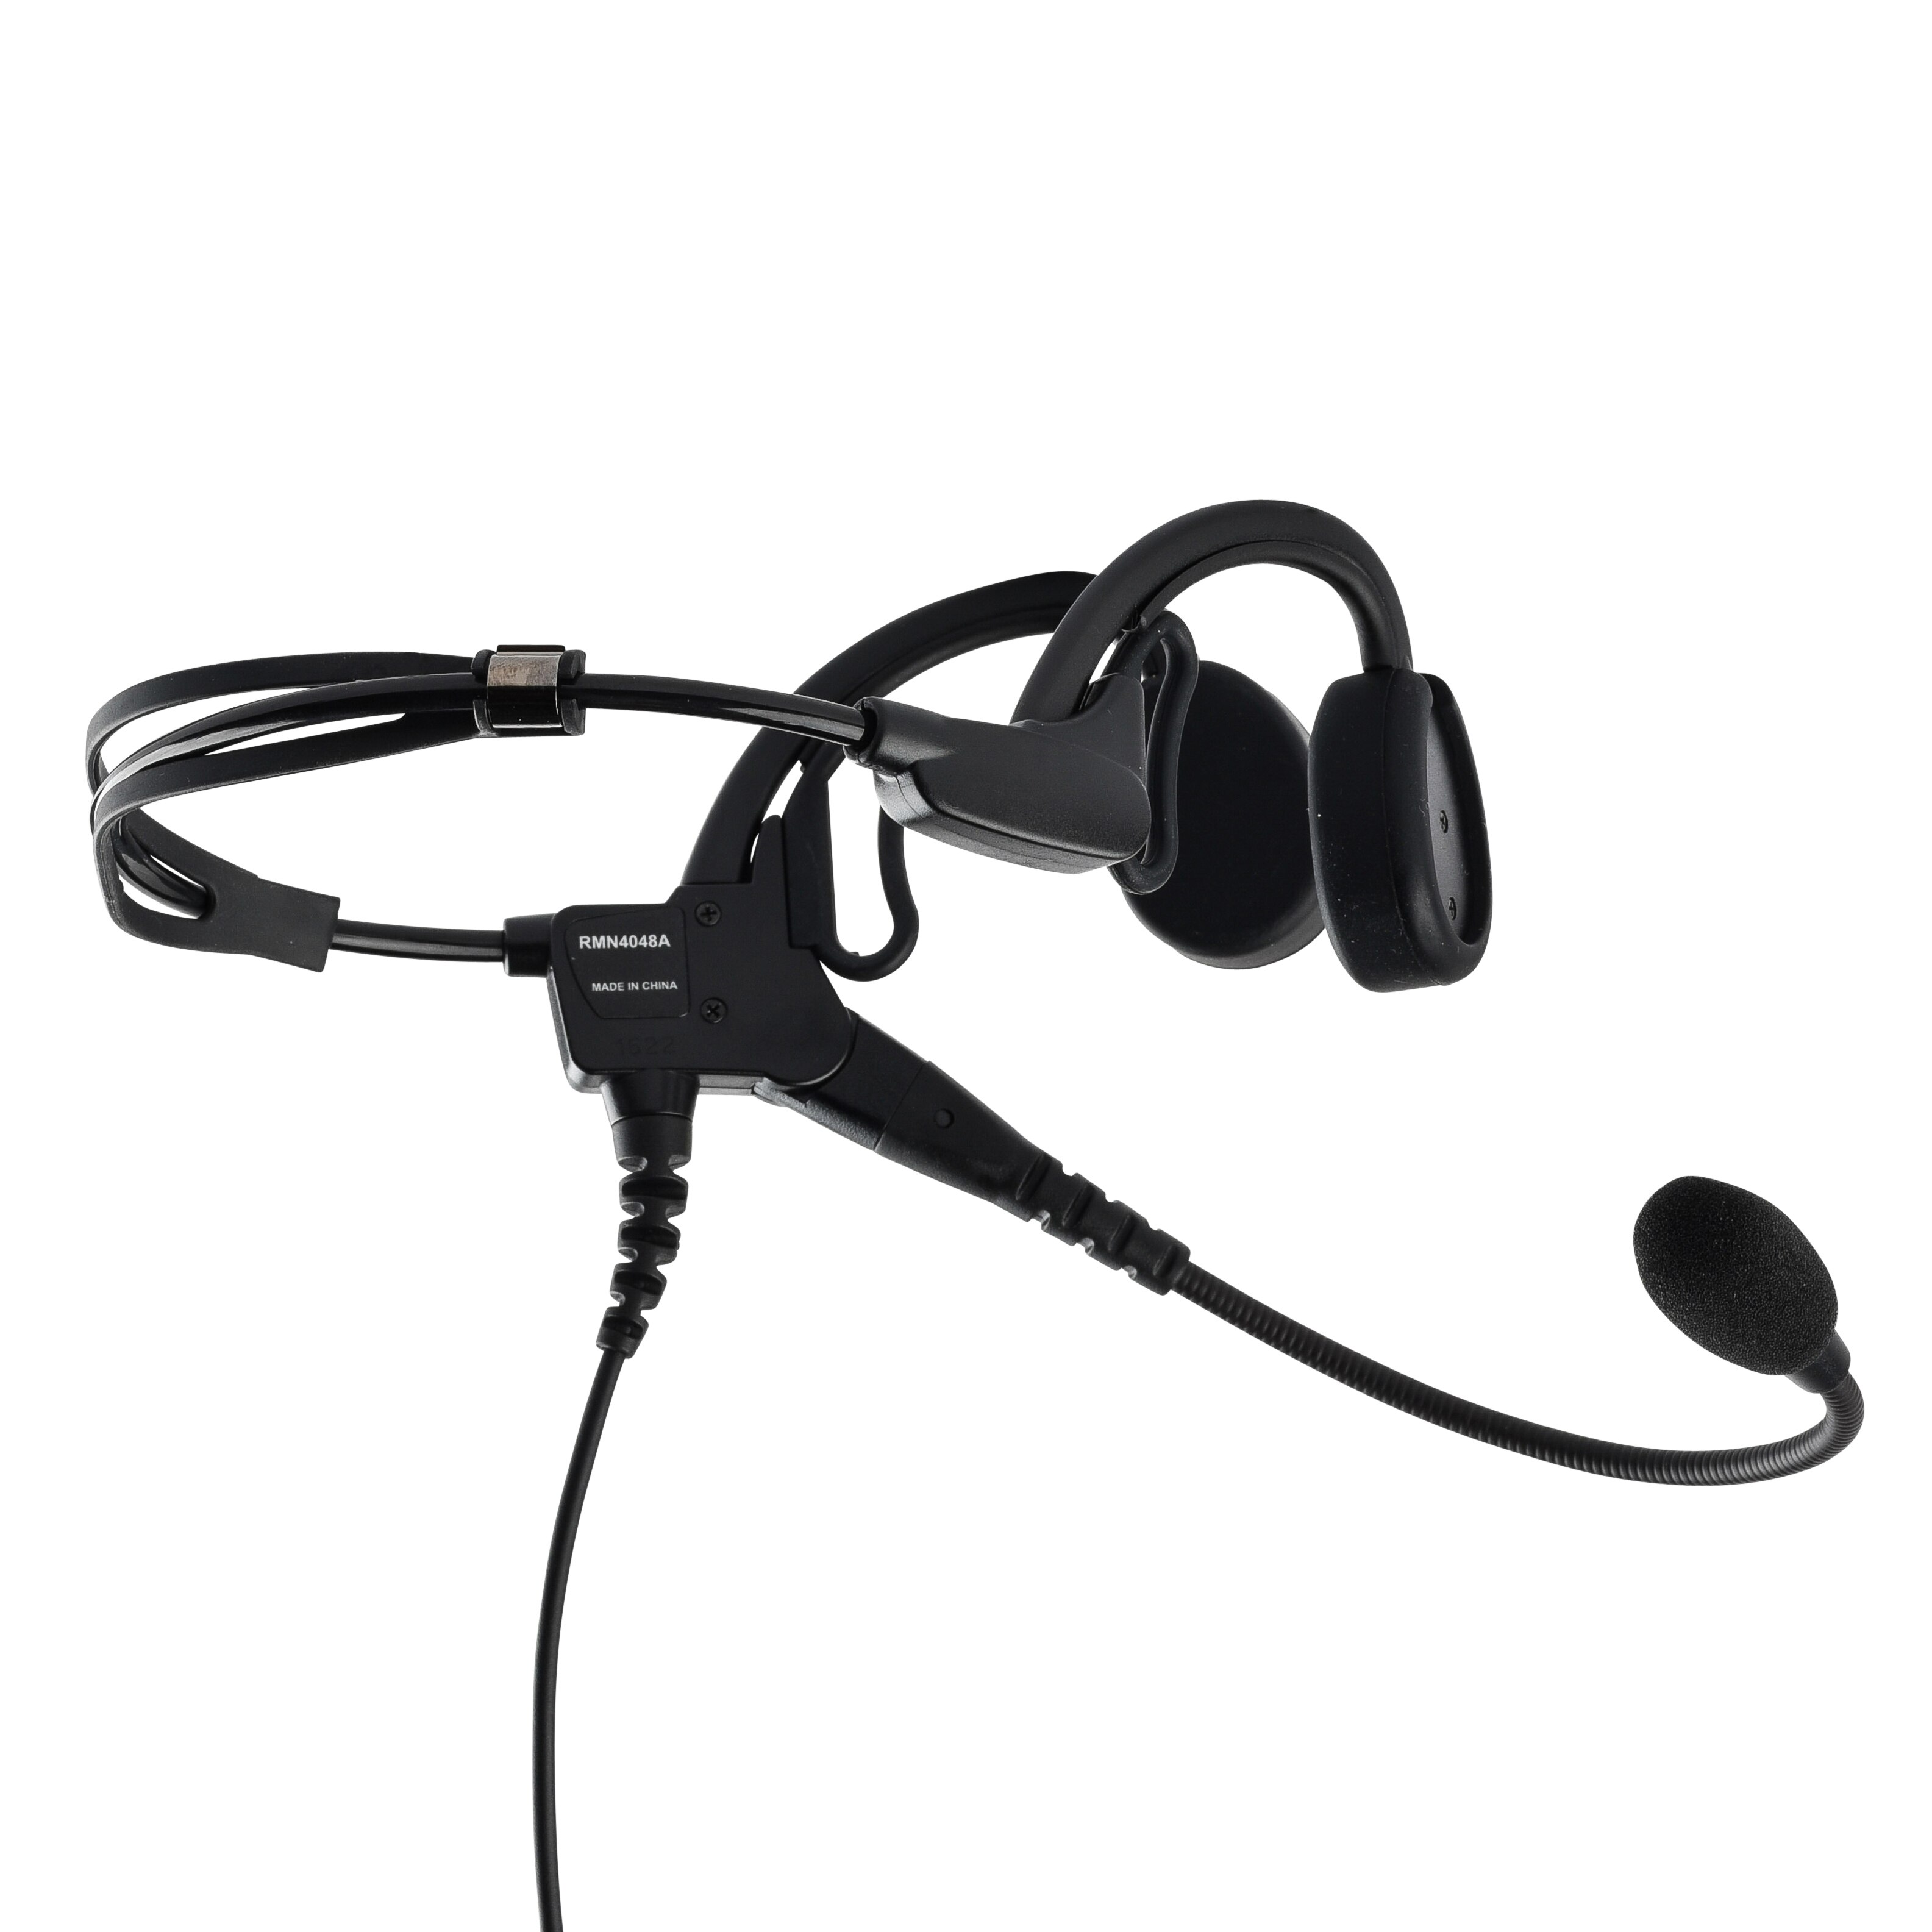 Motorola RMN4048A Temple Transducer Headset With Noise-cancelling Mic for sale online 